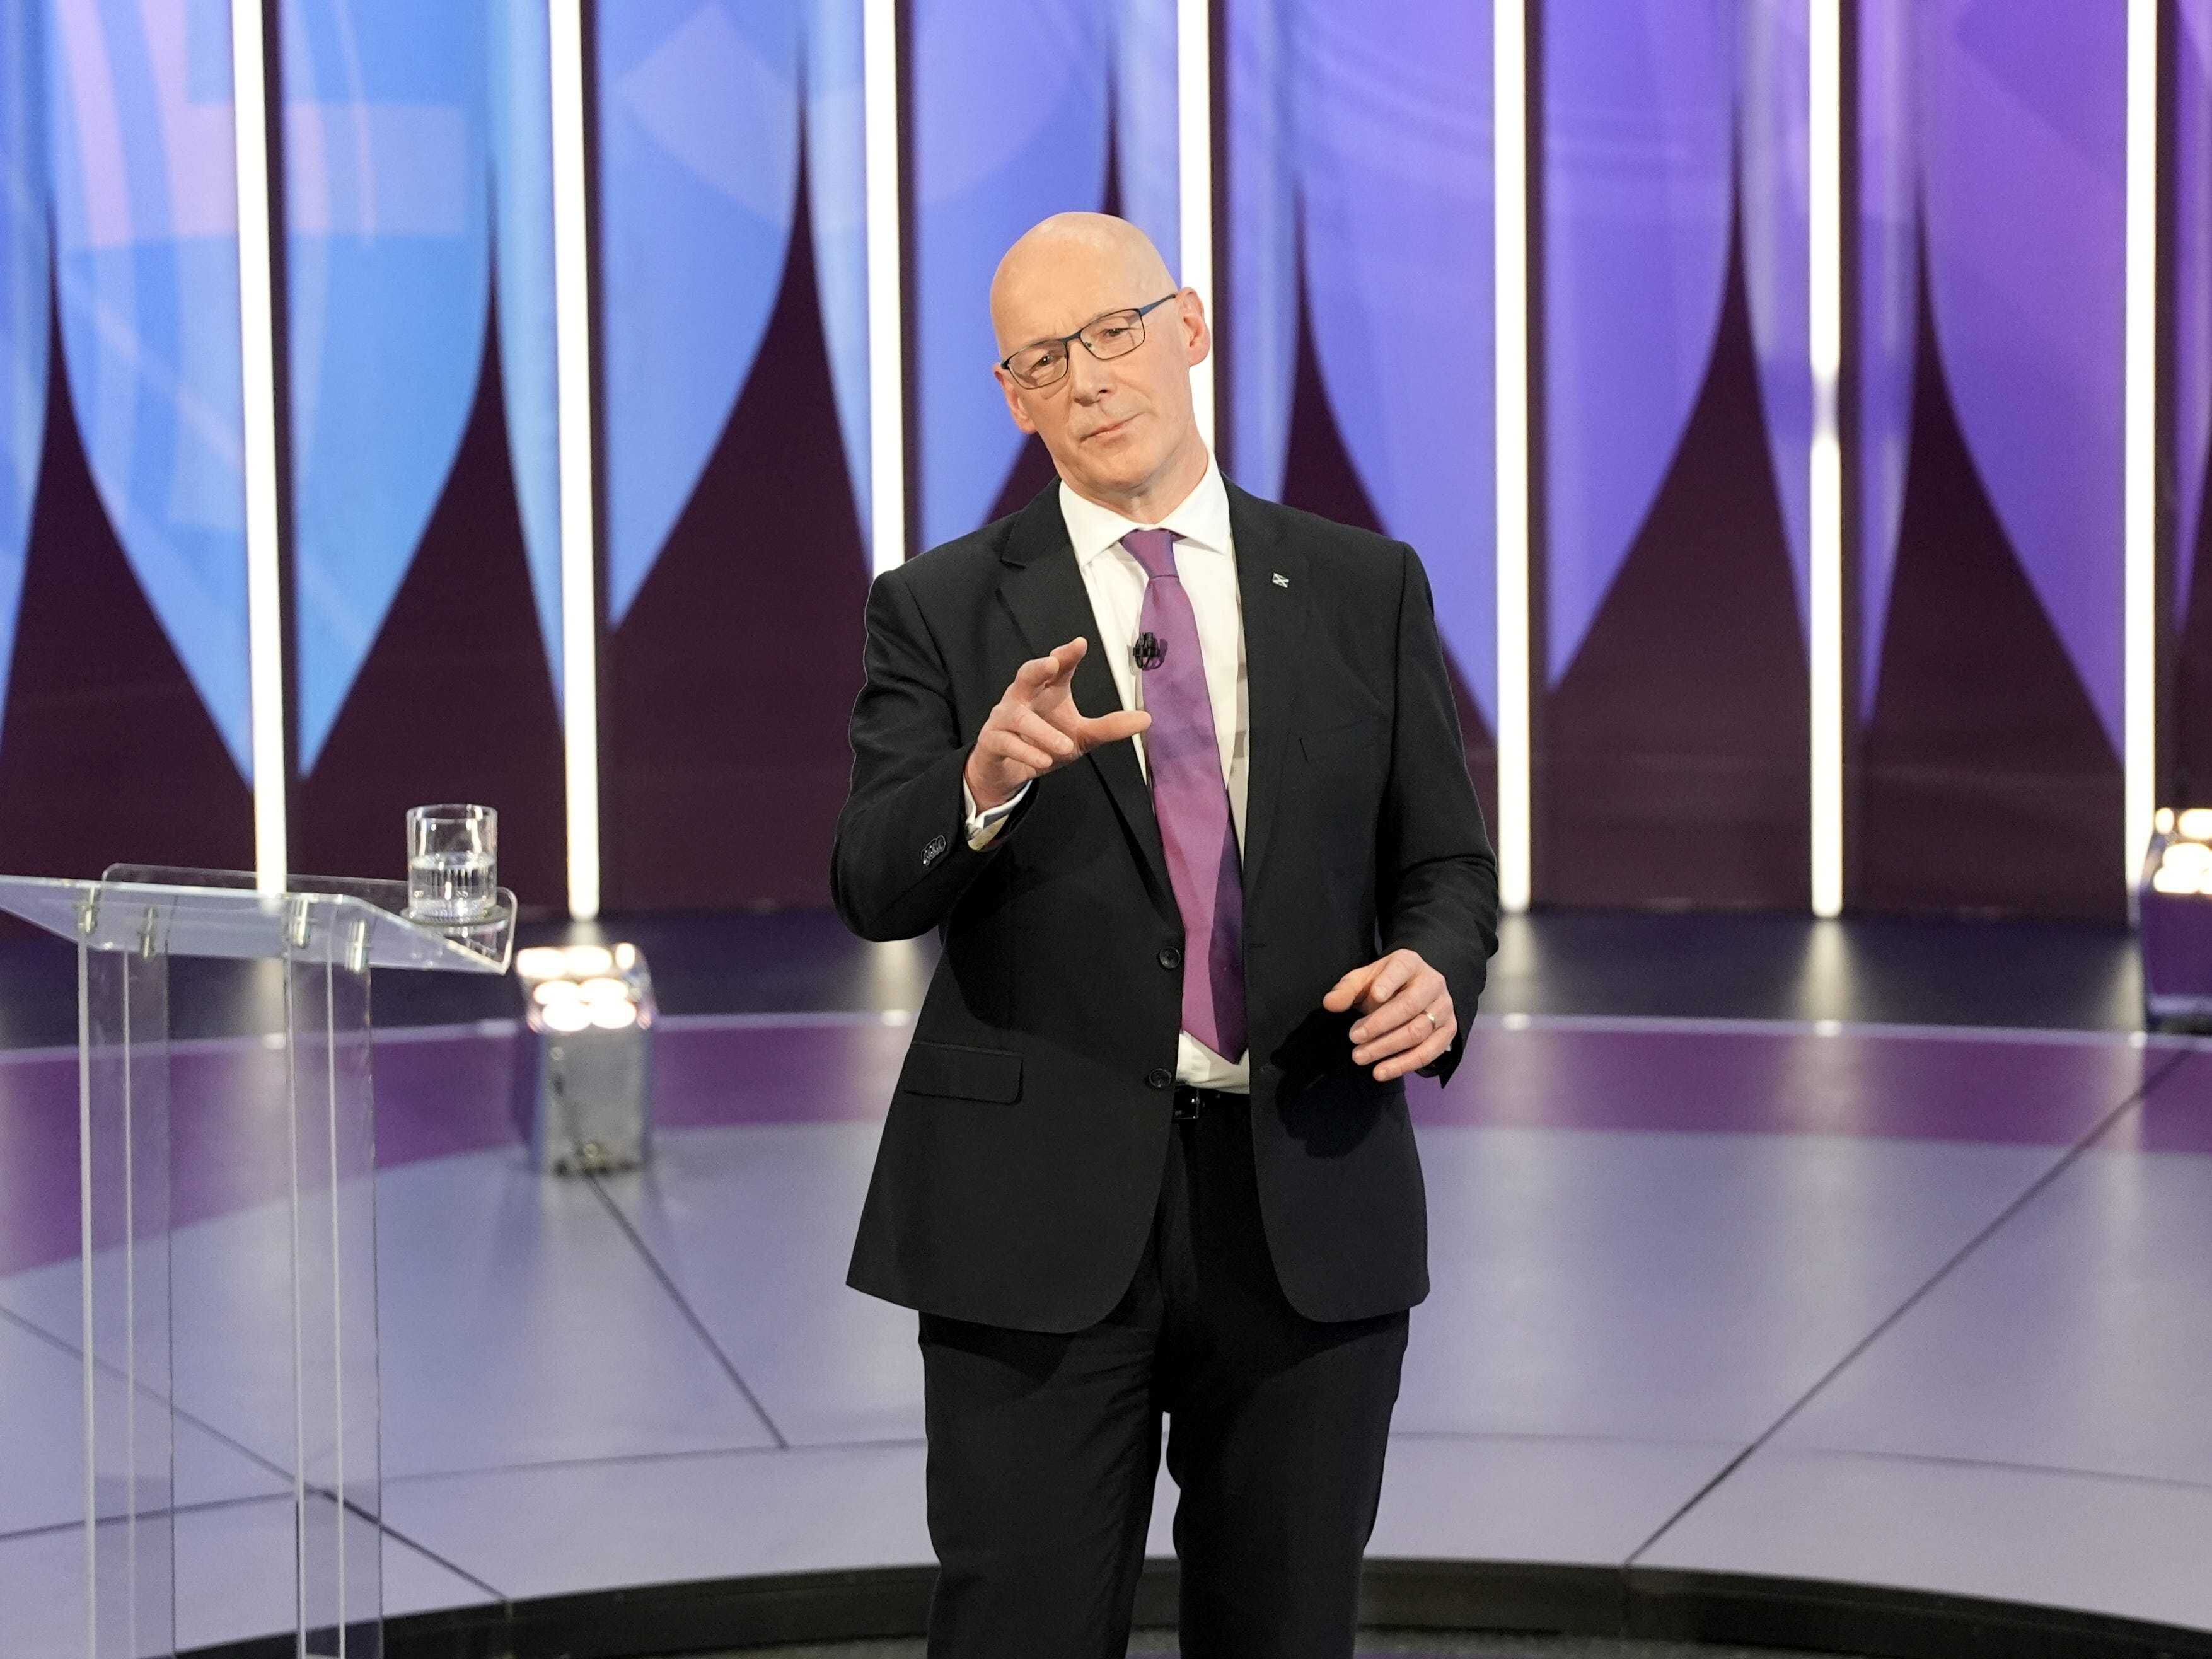 Tories ‘cannot be out of office quick enough’ – John Swinney